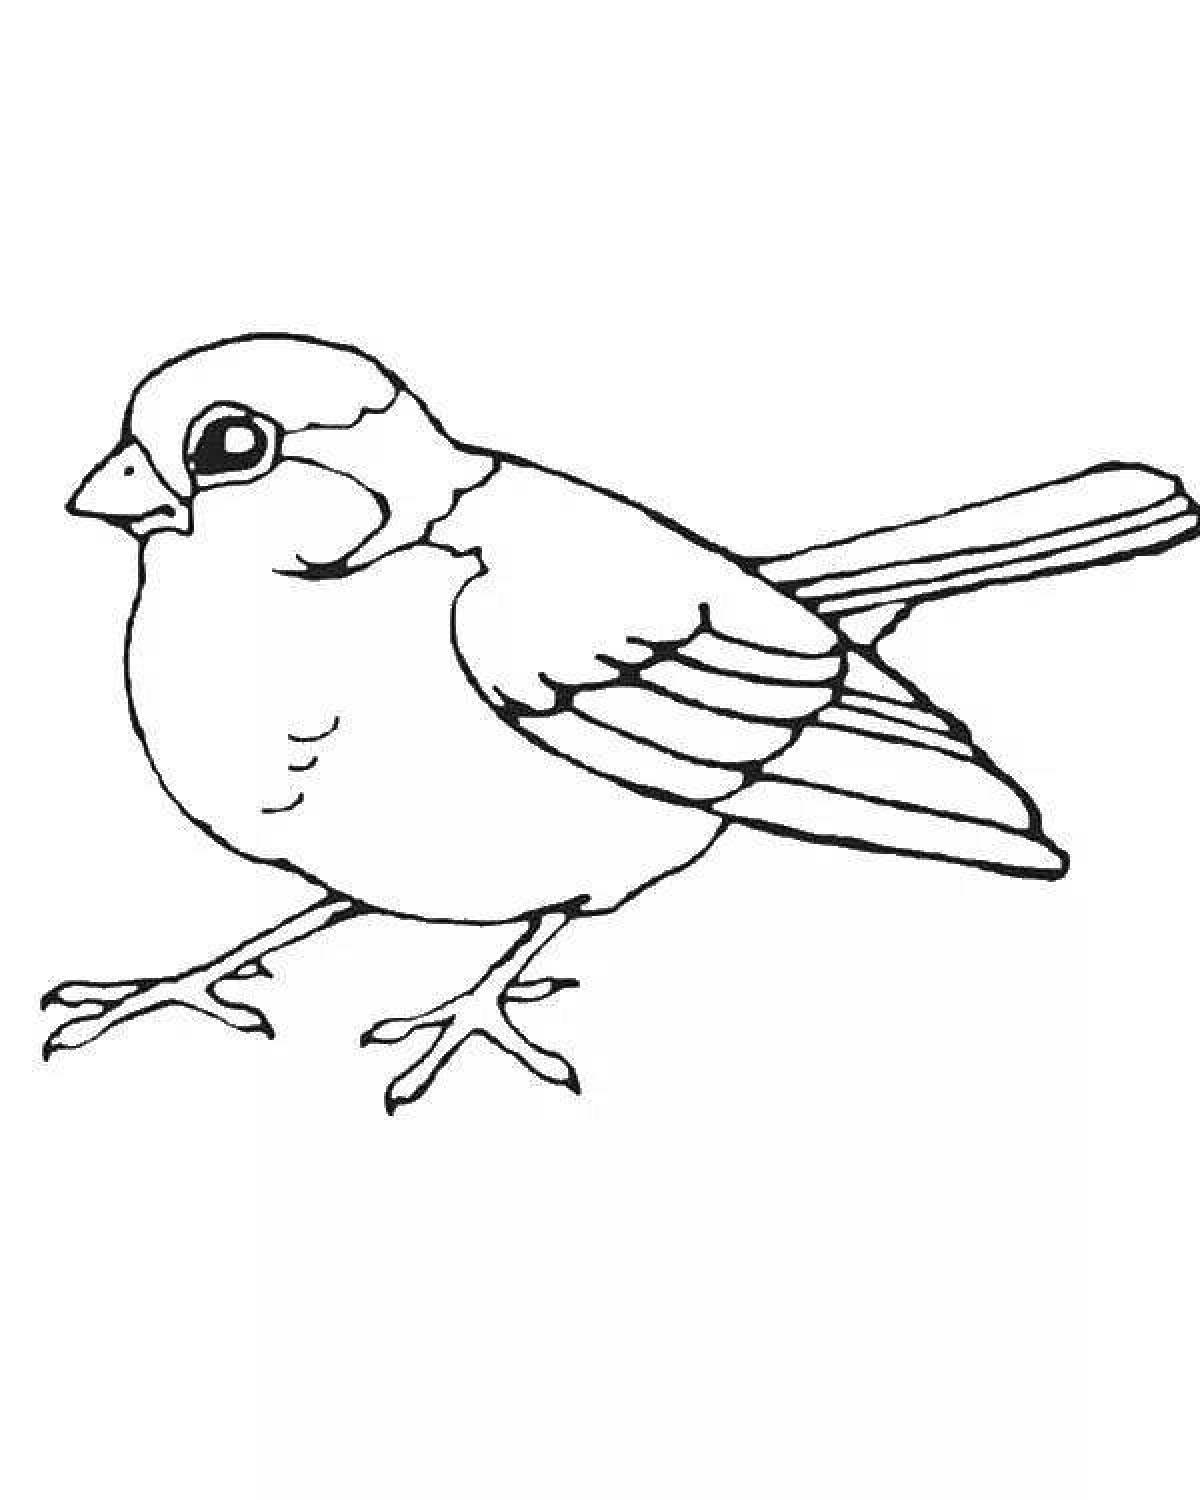 Colouring bright sparrow for children